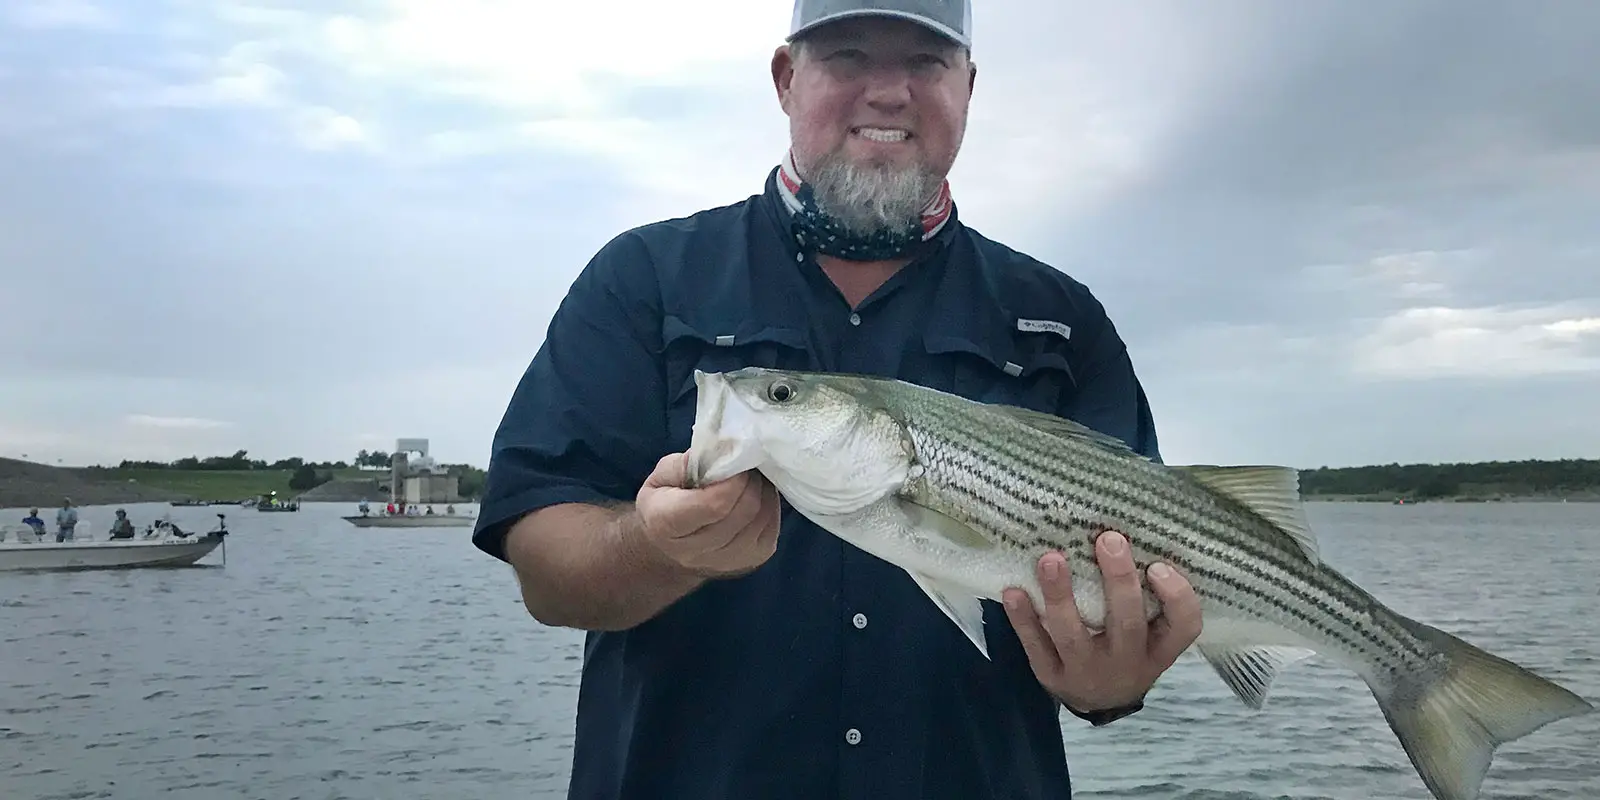 Scents To Attract Striped Bass On The Water